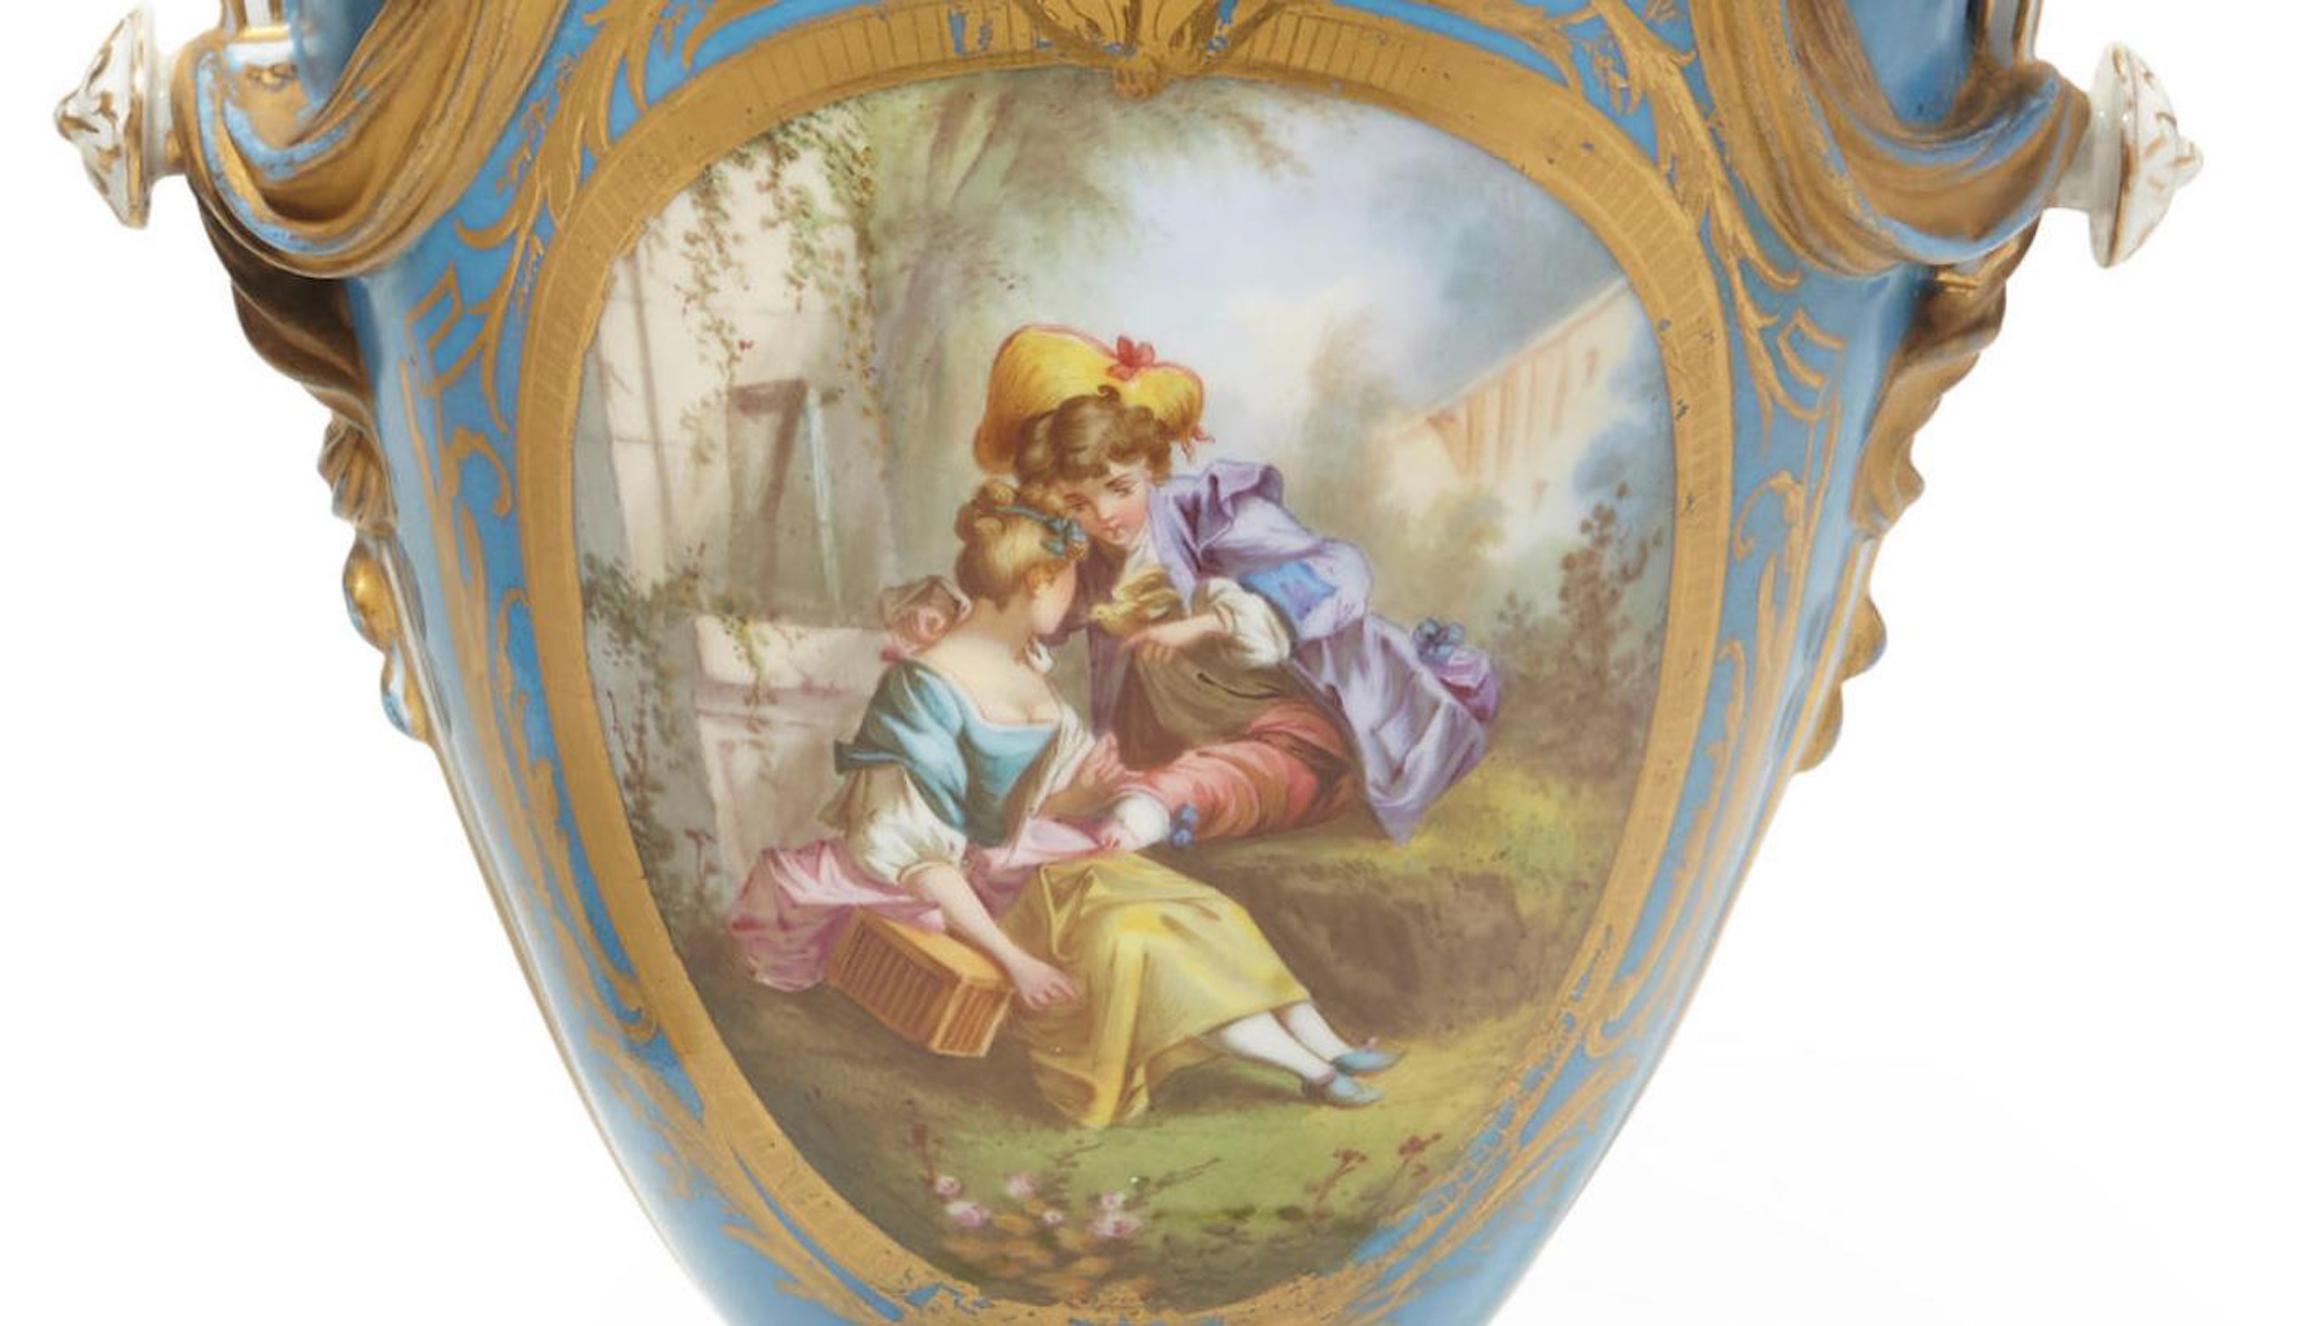 Attractive 19th century pair of French Sèvres style porcelain two handled vases.

The two gilt flying playful cherubs holding wreaths are applied to the Bleu Celeste porcelain neck, above an ovoid body painted on both sides, the front is centered